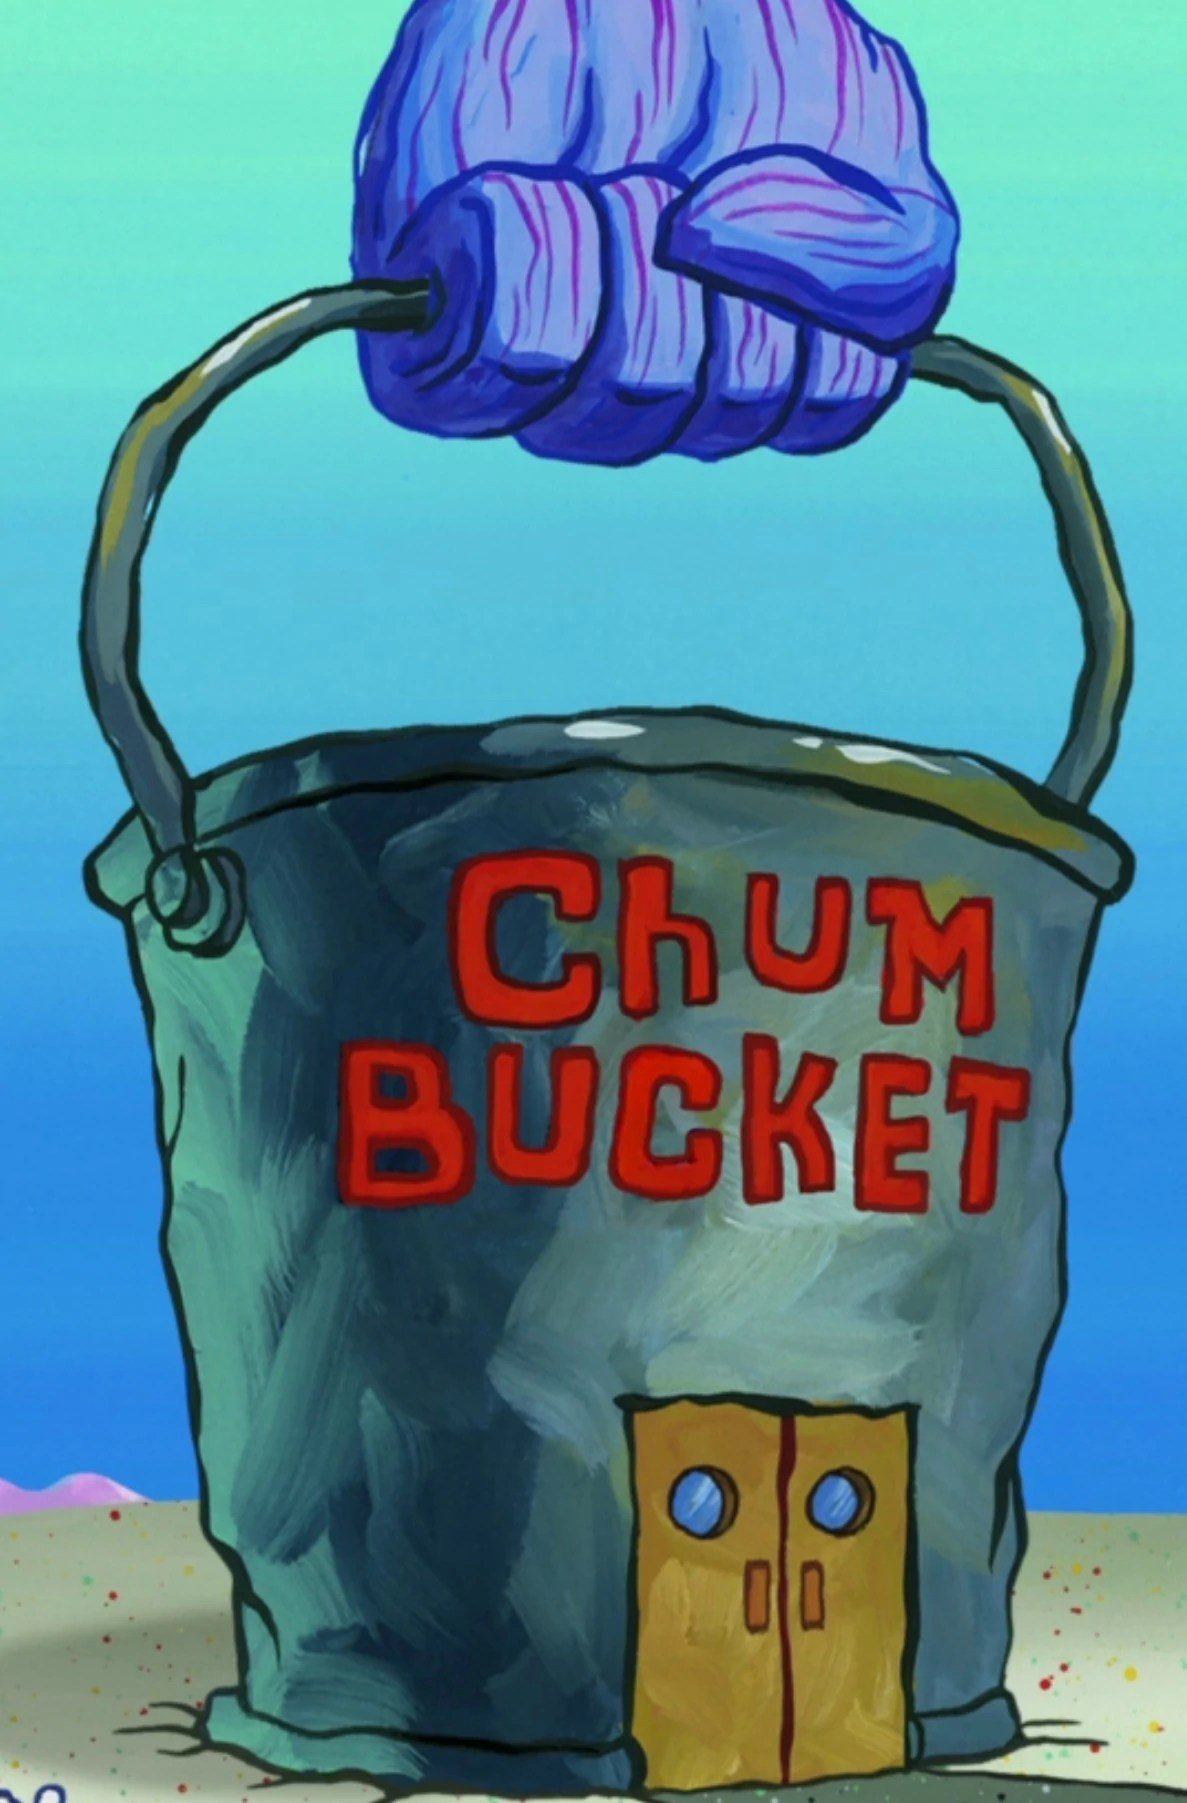 Chum Bucket Food / The chum bucket is an unsuccessful fast food restaurant that is located right across the street from the krusty krab.'s Collection